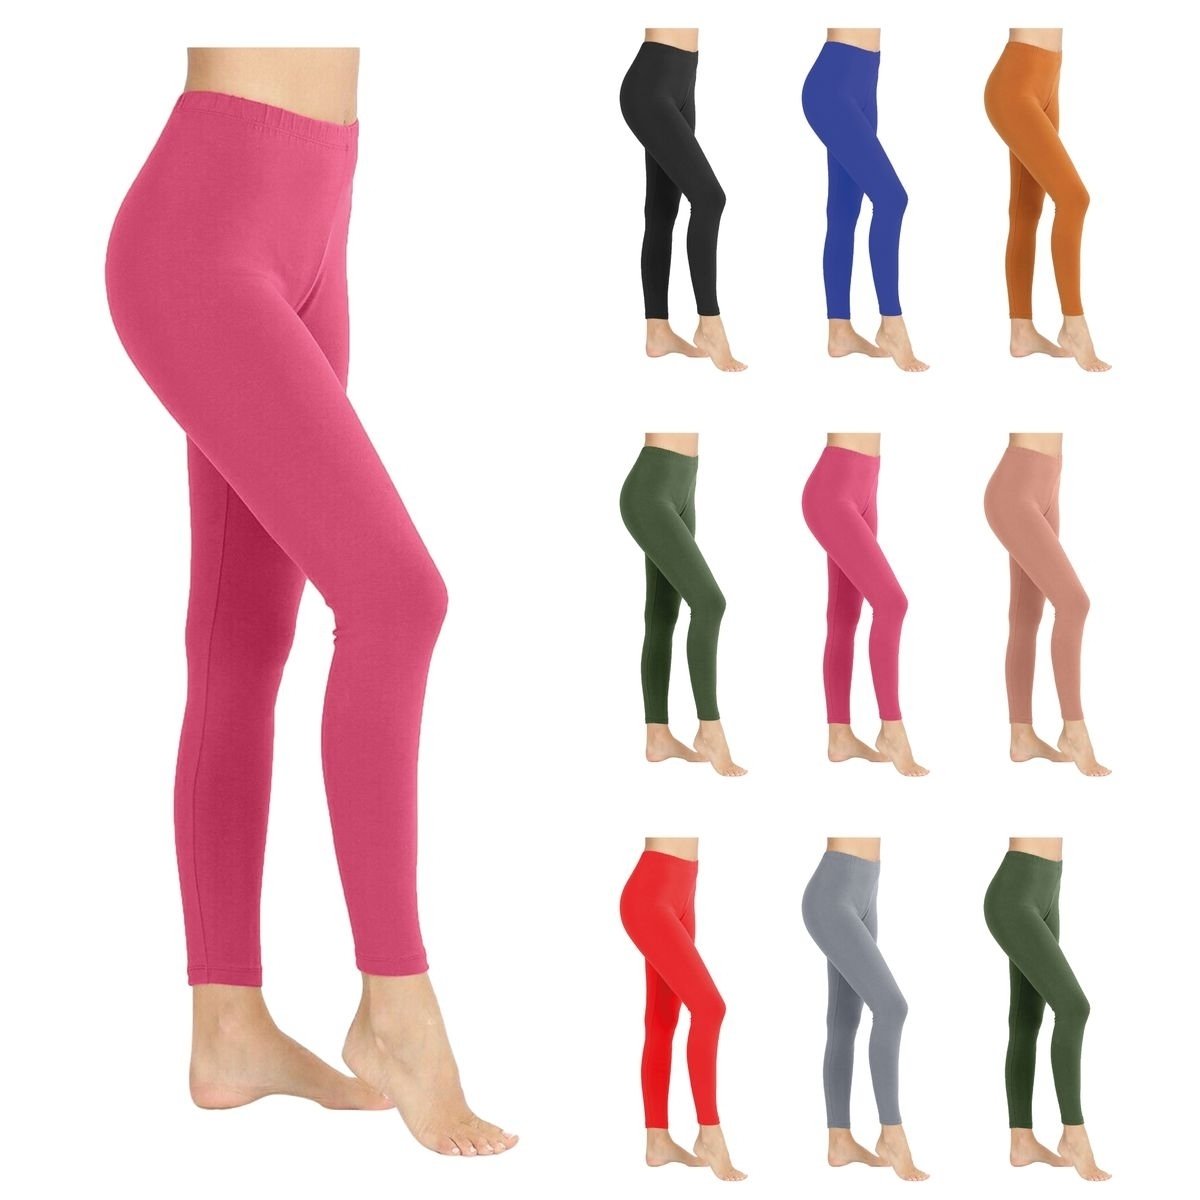 3-Pack Women's High-Waisted Tummy Control Yoga Leggings Stretchy Athletic Tights For Workout Running Gym Soft Yummy Fabric Solid Color Pants